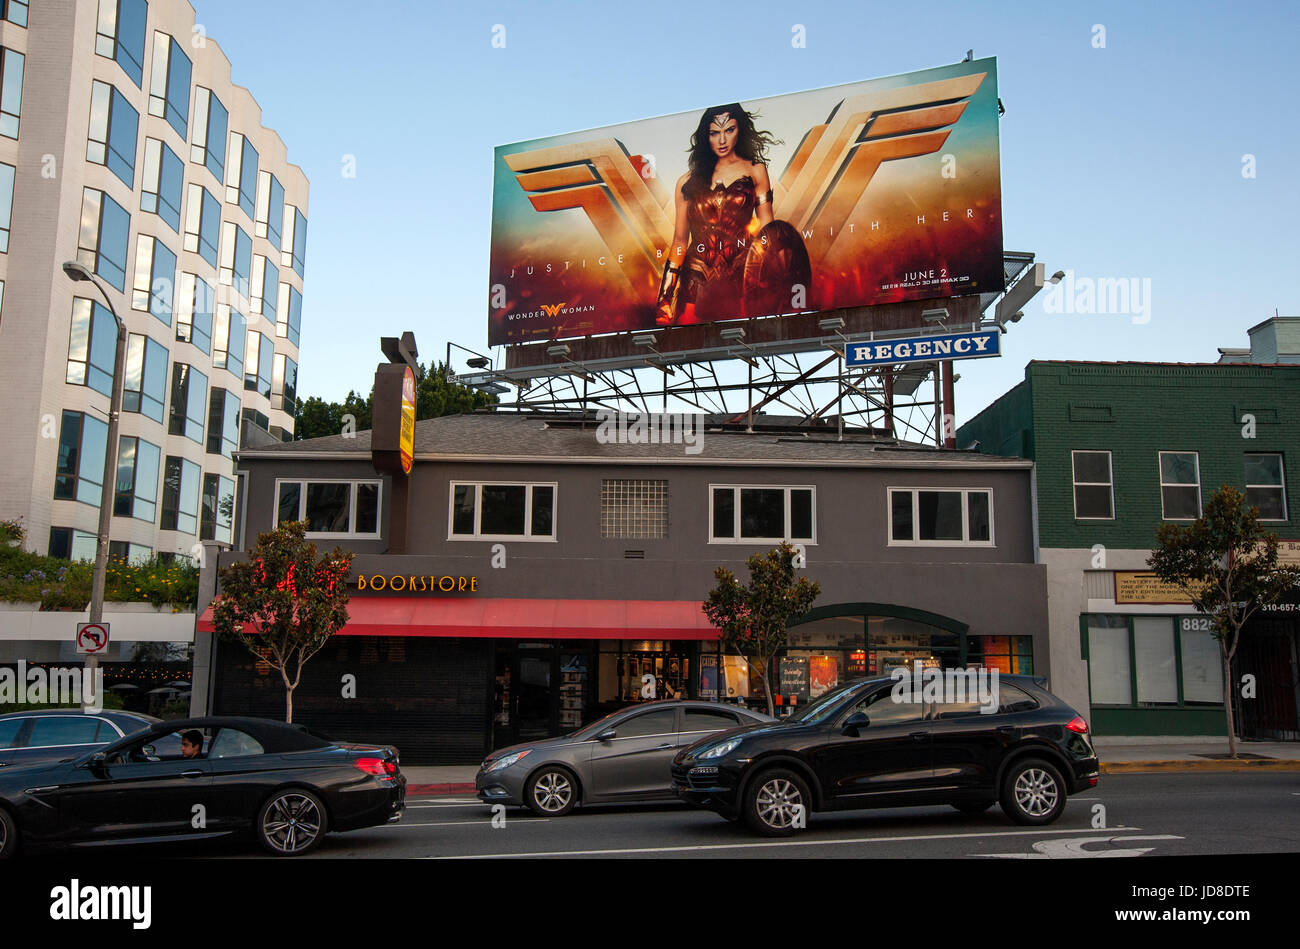 Billboard promoting the Wonder Woman movie on the Sunset Strip in Los Angeles, CA Stock Photo